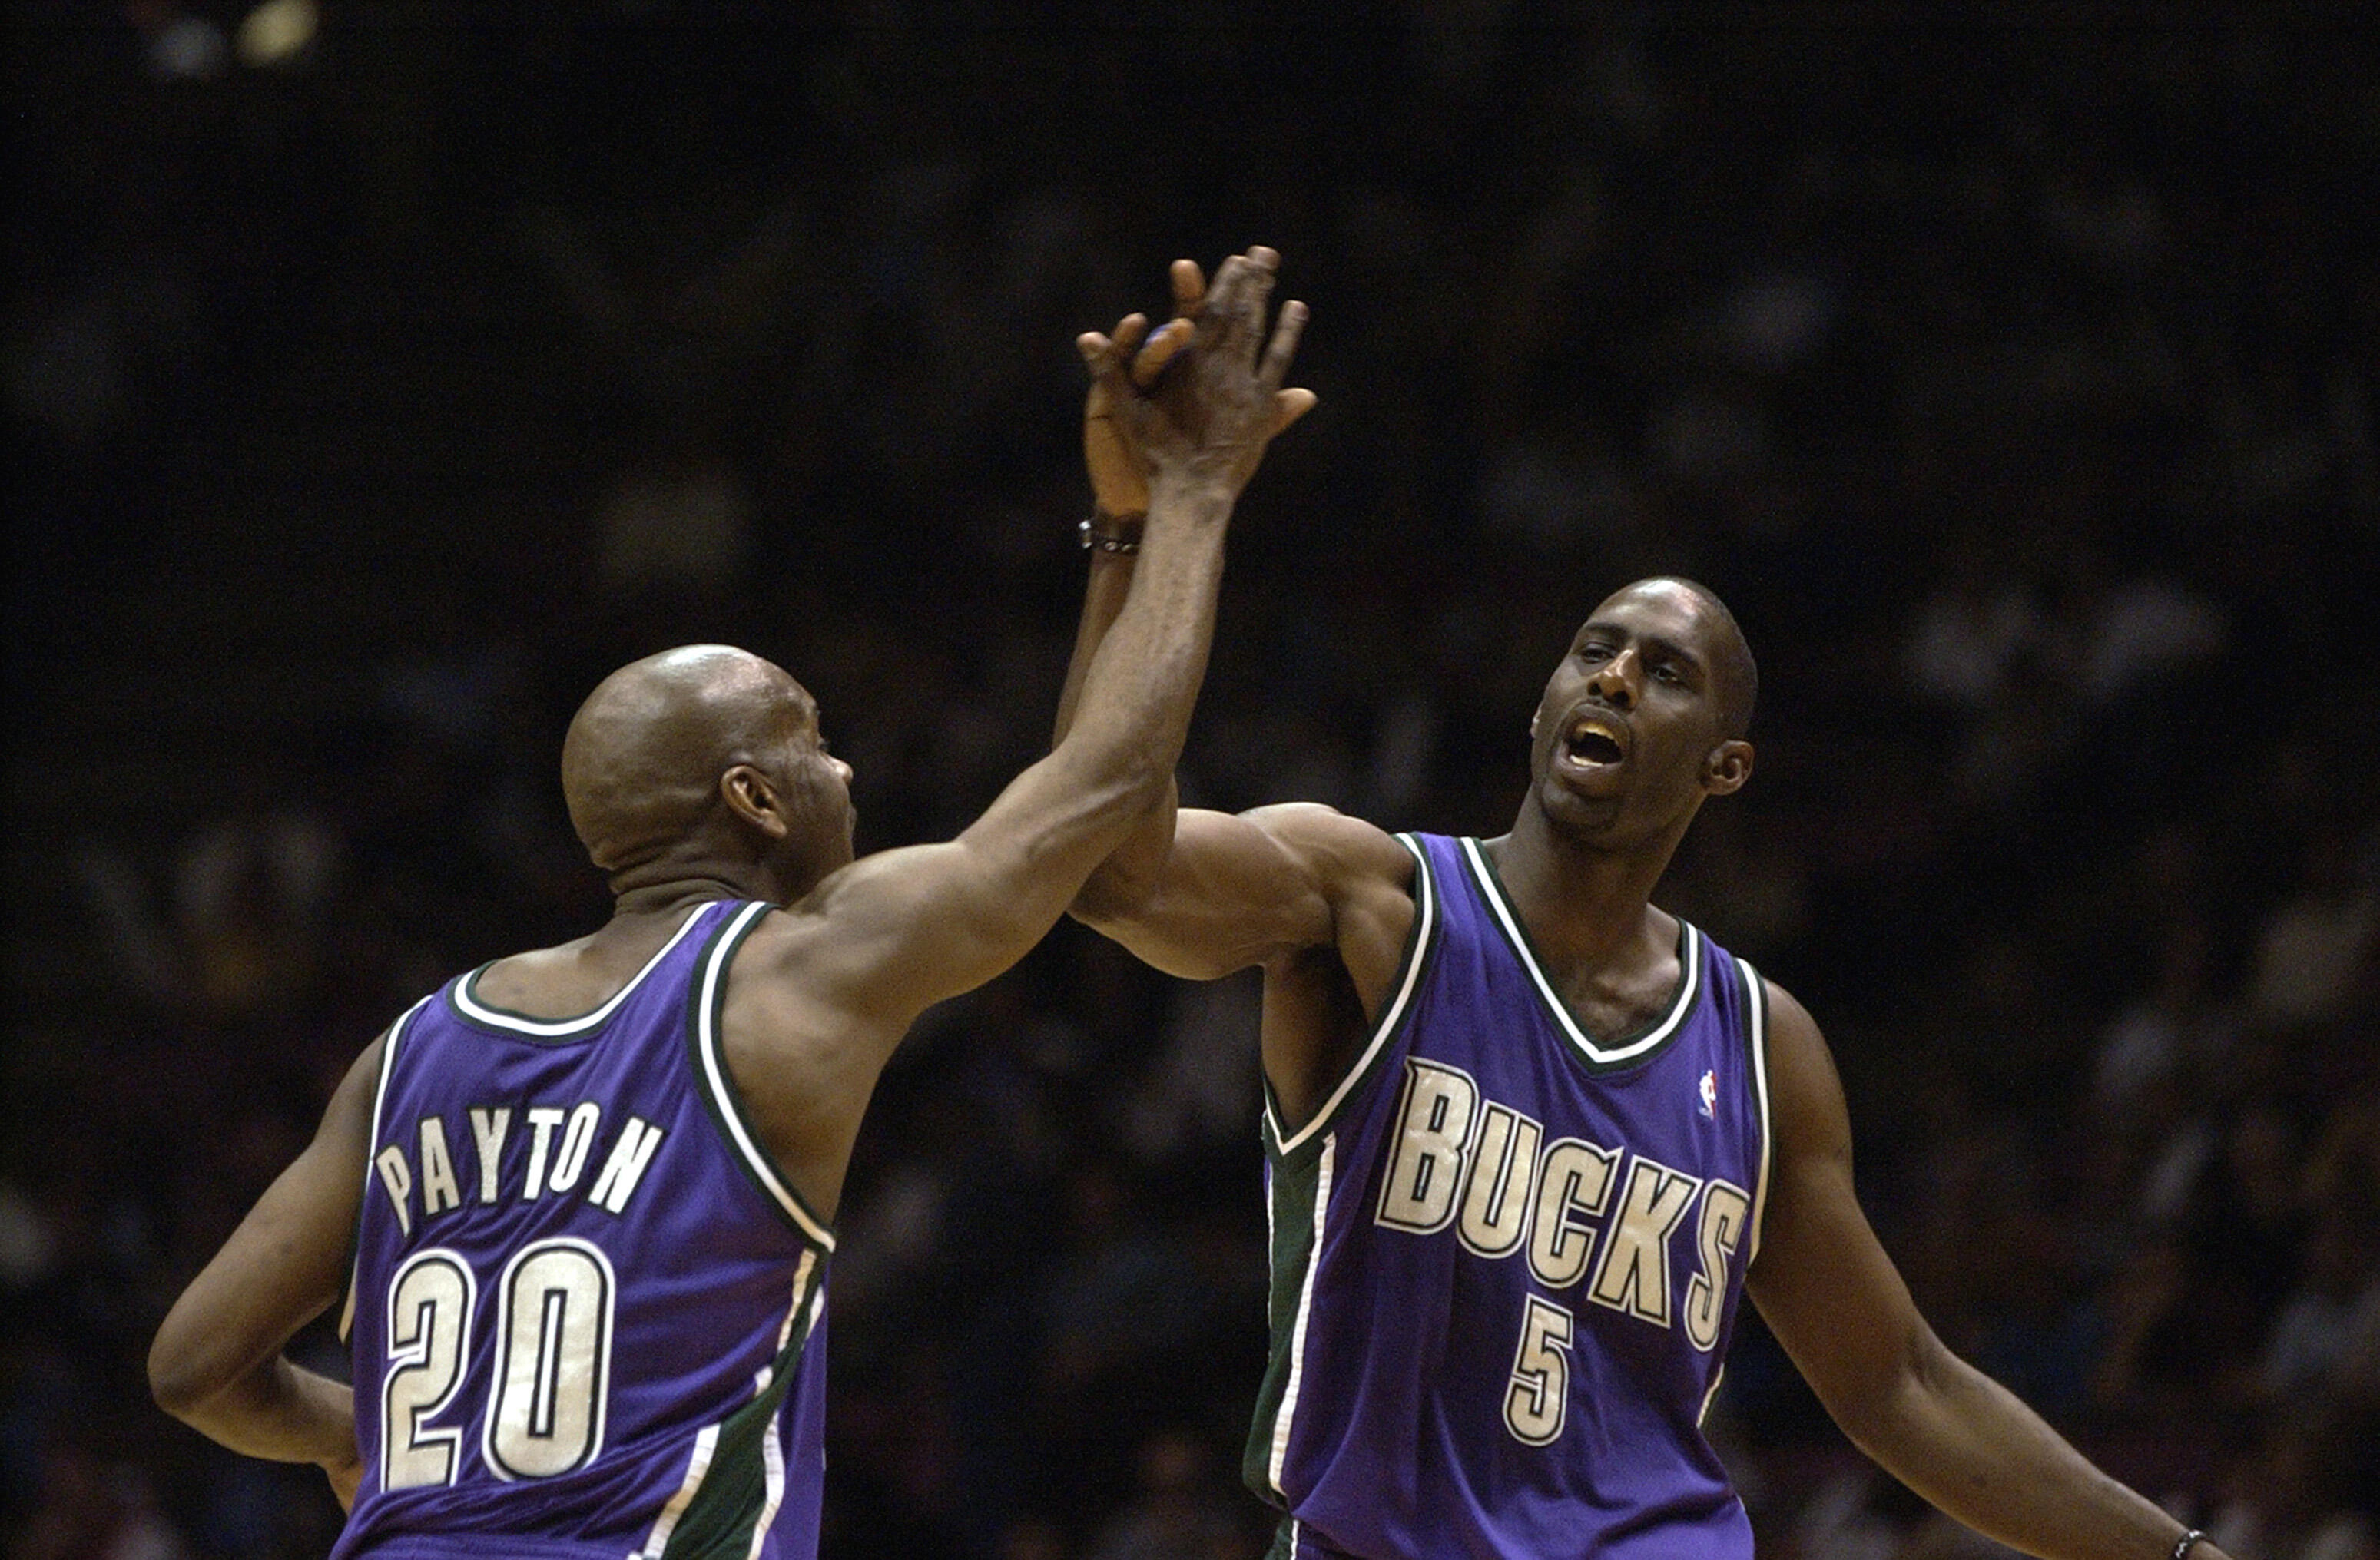 EAST RUTHERFORD, NJ - APRIL 22:  Gary Payton #20 and Tim Thomas #5 of the Milwaukee Bucks celebrate victory over the New Jersey Nets in Game two of the Eastern Conference Quarterfinals during the 2003 NBA Playoffs at Continental Airlines Arena on April 22